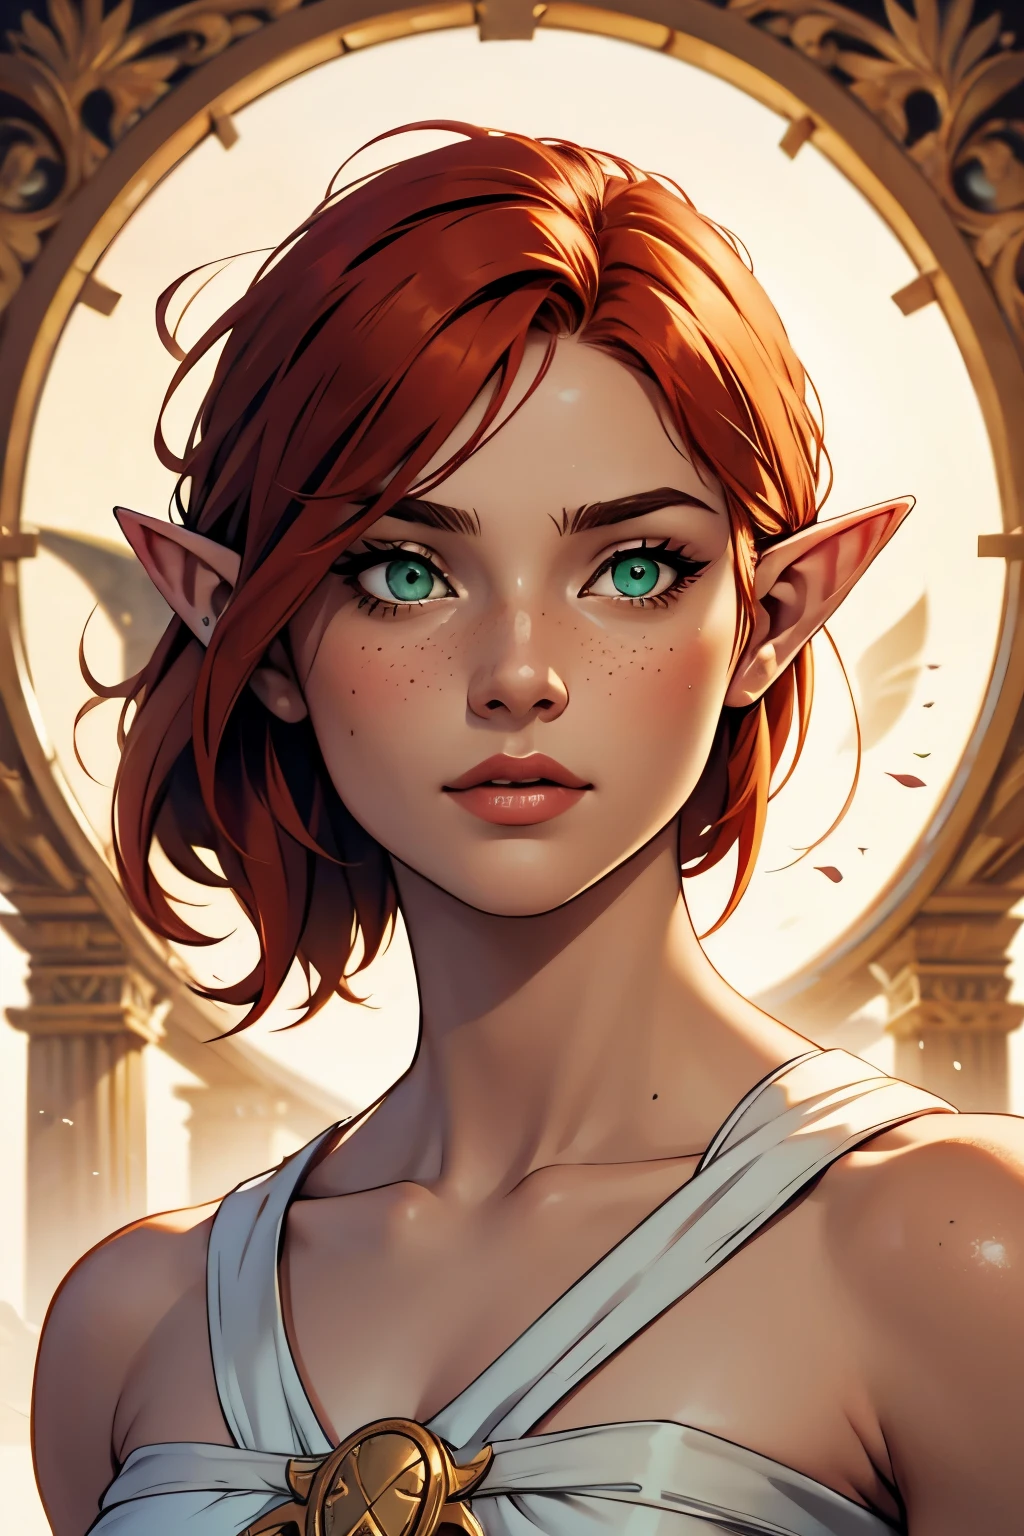 redhead elf woman, green eyes, freckless, athletic muscle figure, ancient greek, Iliad goplit hero, white tunic and sandals, detailed portrait dnd style monk